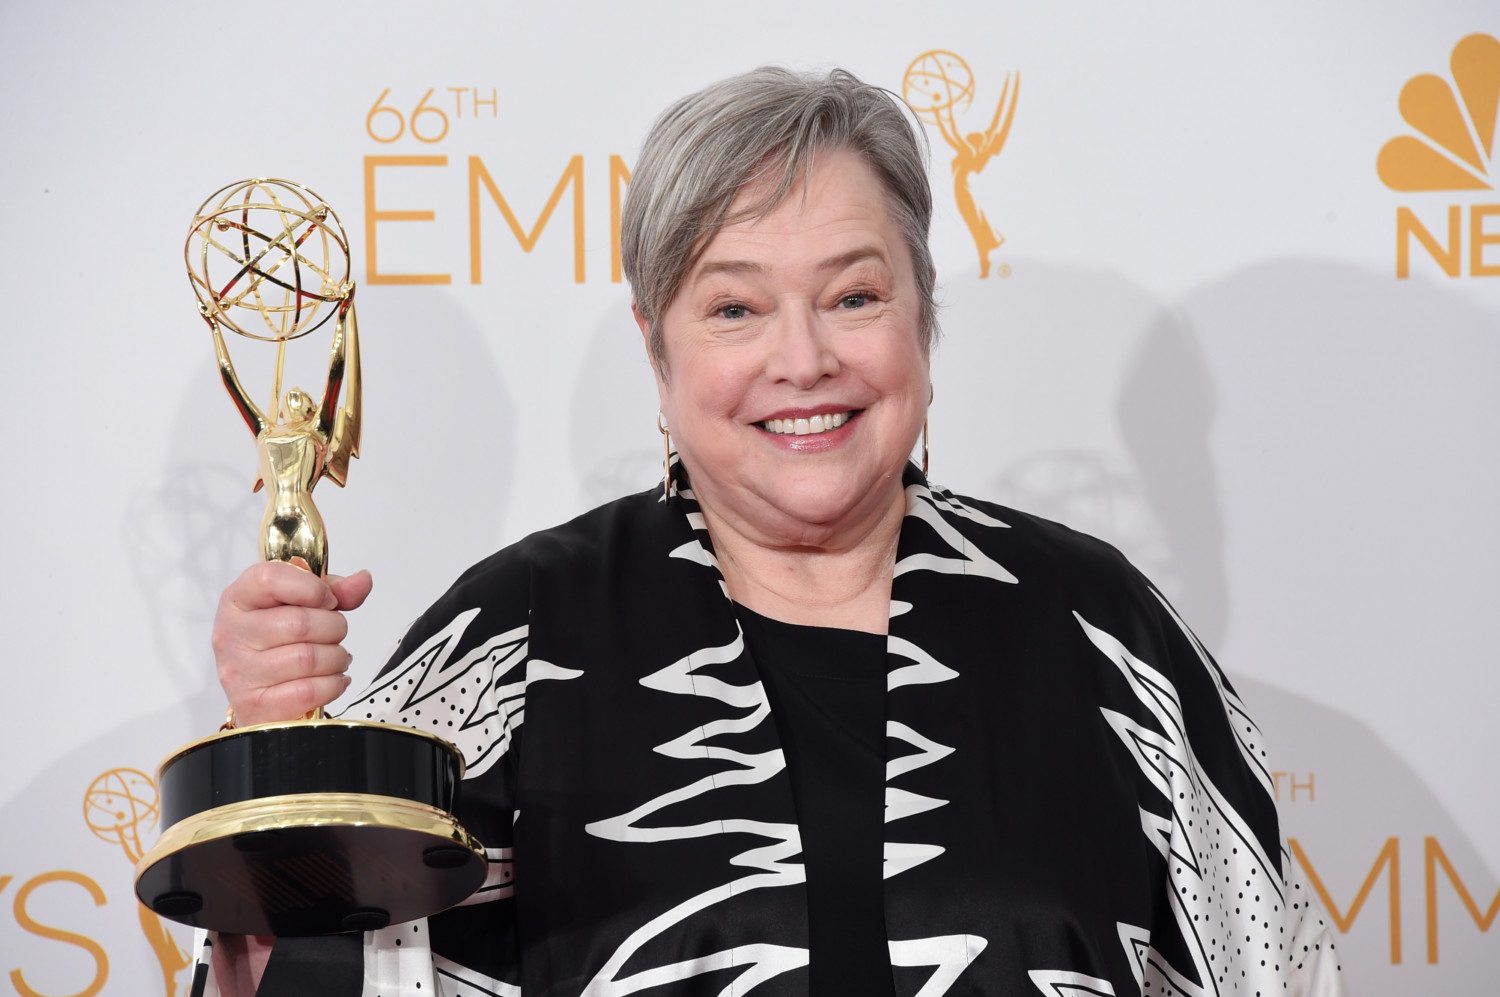 Kathy Bates flaunting her award after winning an Emmy, 2014. (Photo by Television Academy).